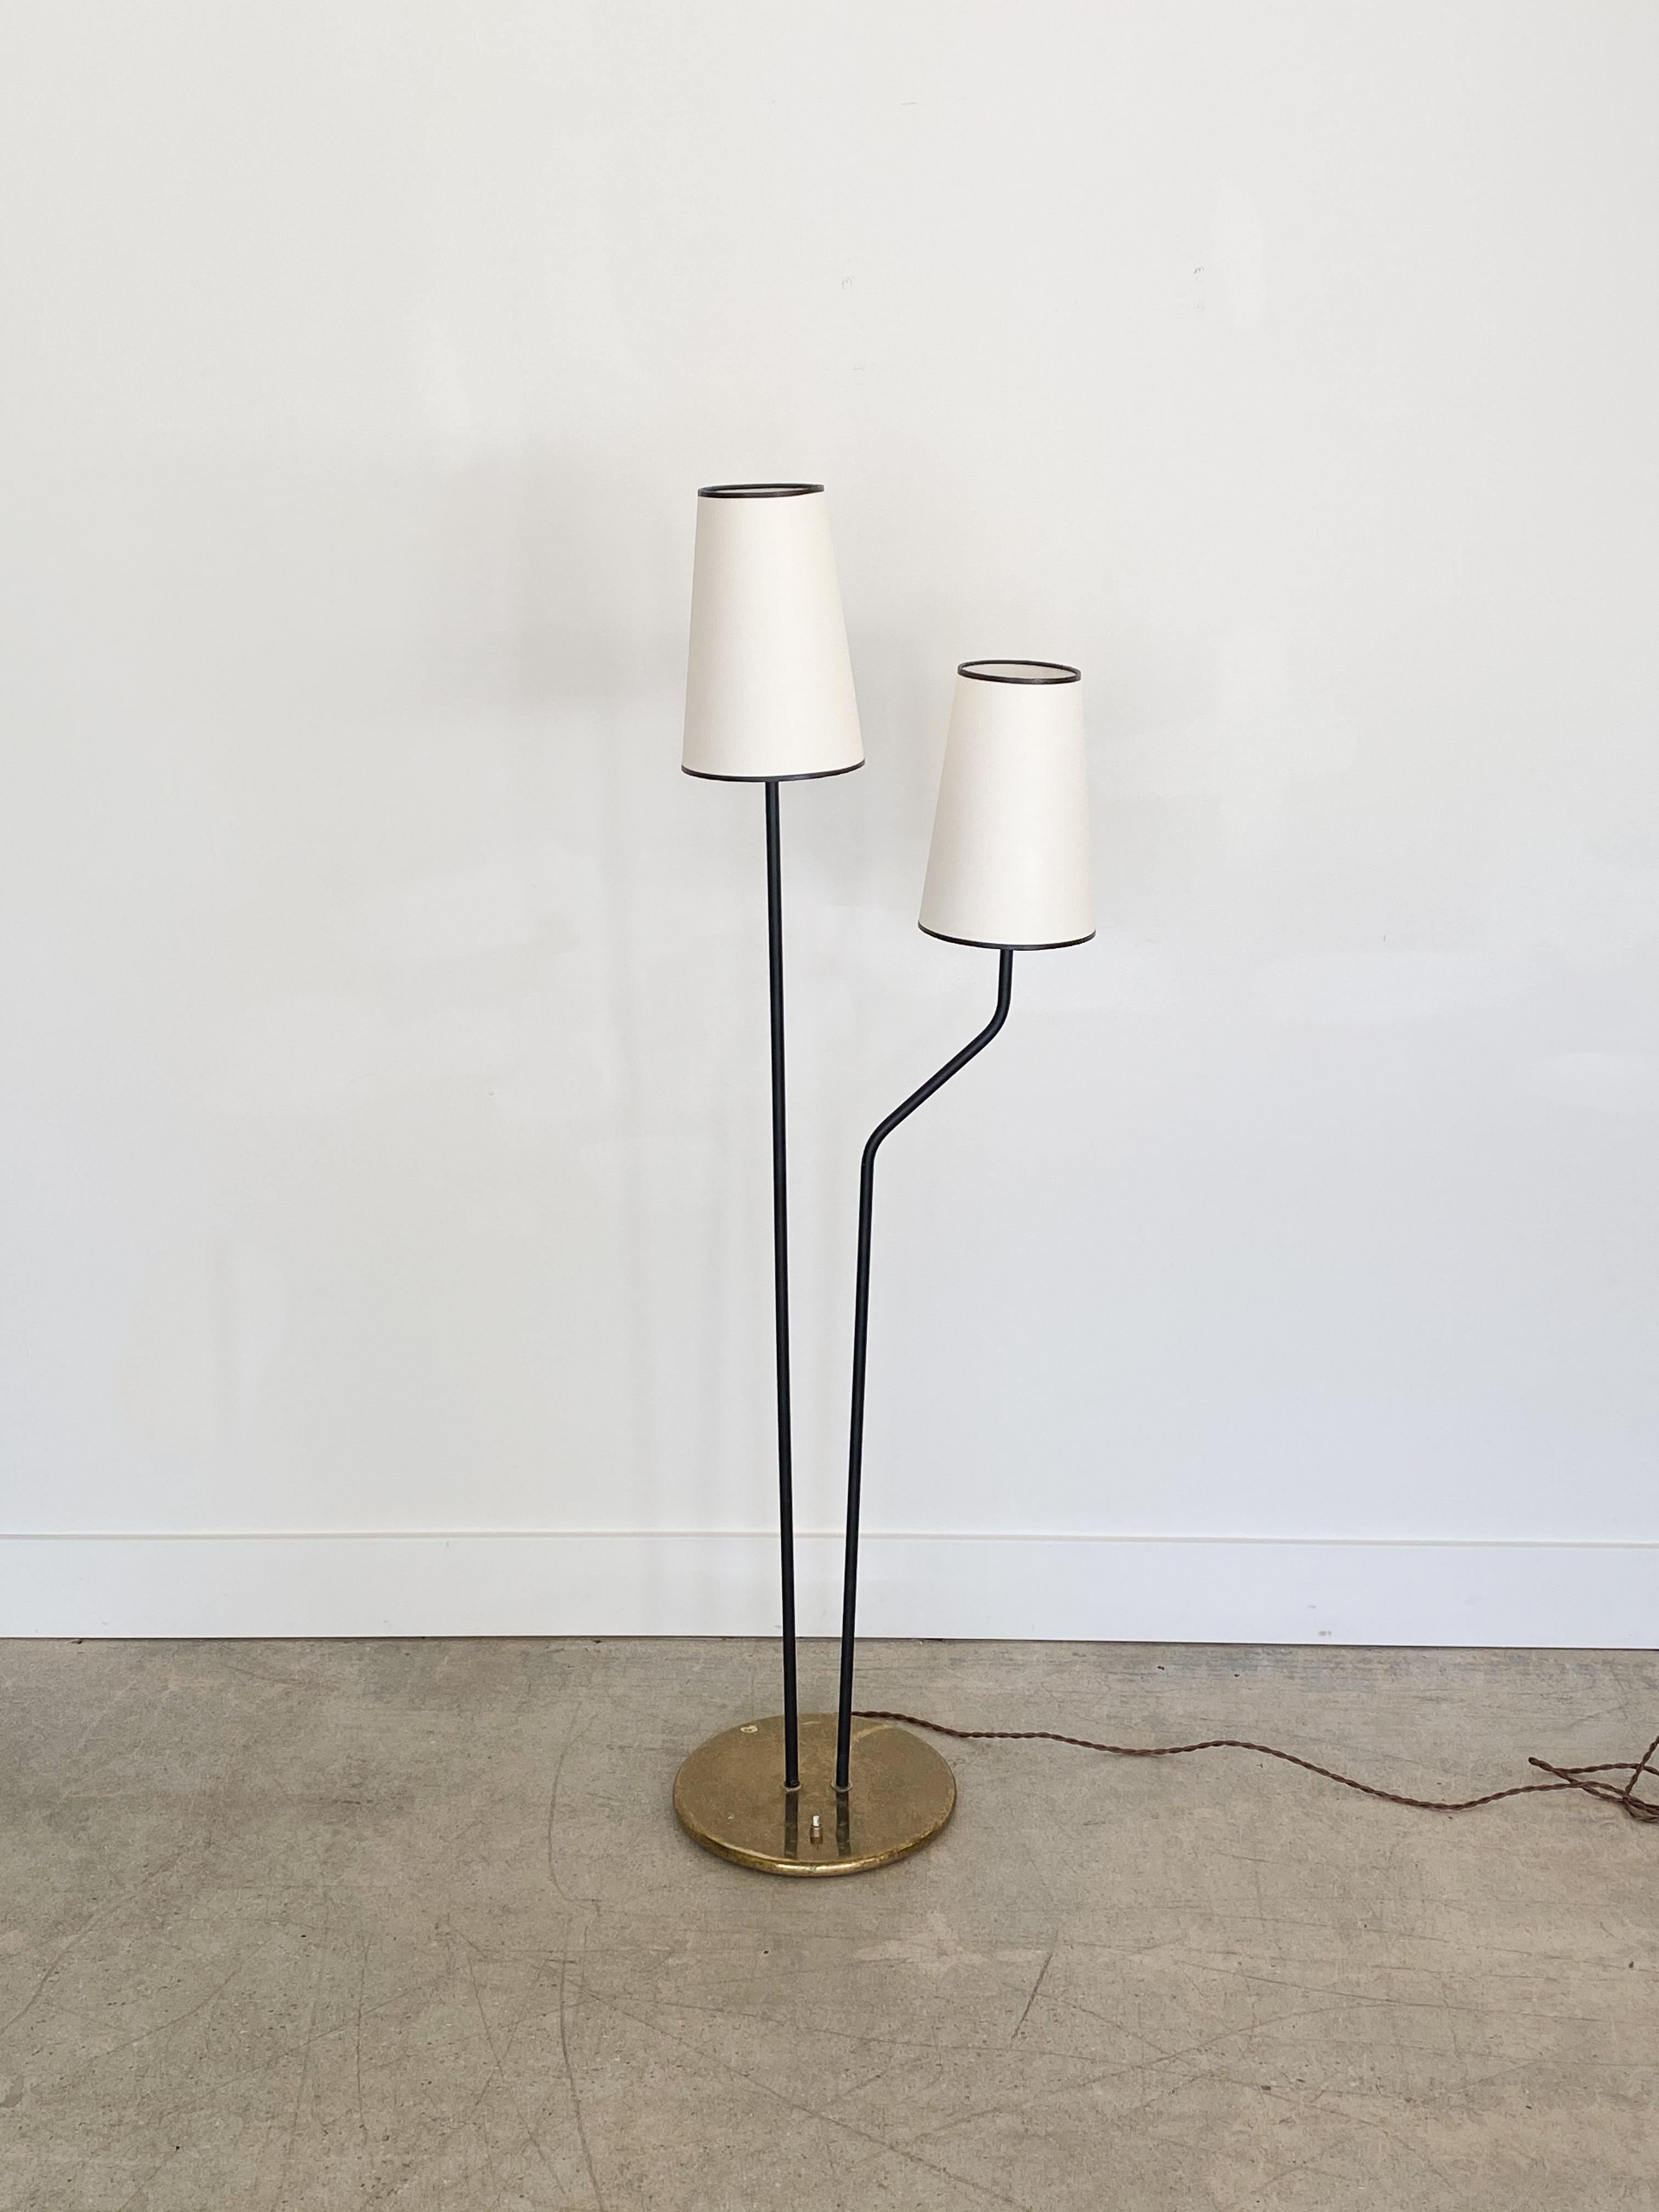 Black iron two-light floor lamp from France, 1950s. Circular brass base with two black painted iron stems each with a single socket. Newly rewired and new paper shades. Original condition showing scratches, age, and patina.